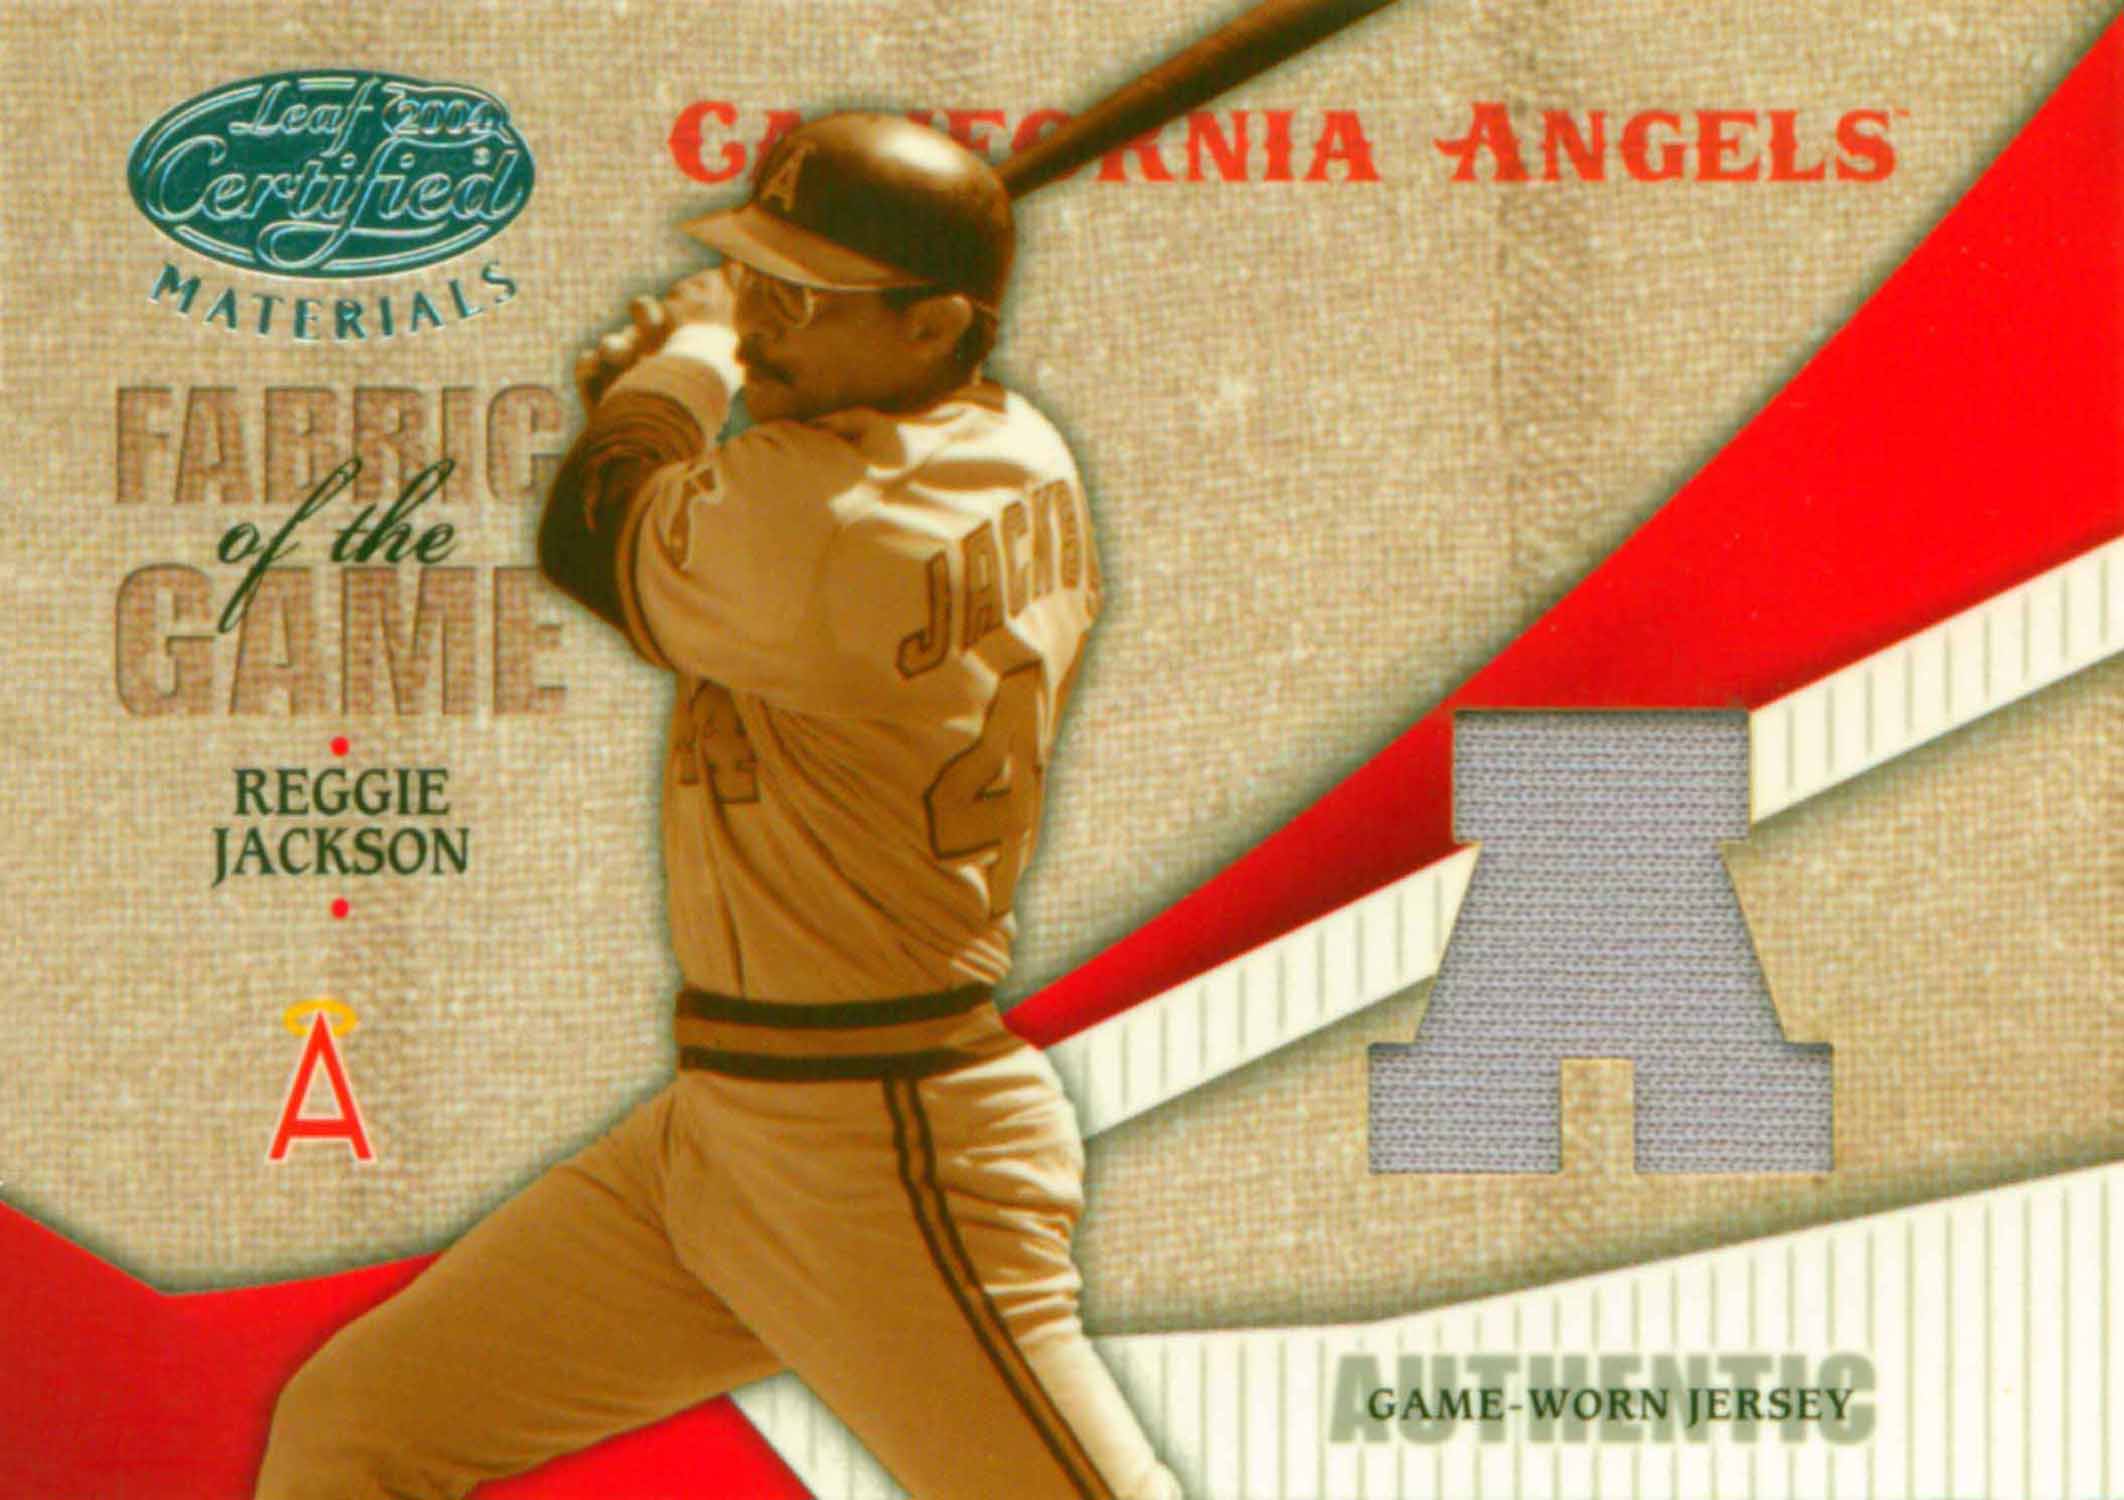 2004 Leaf Certified Materials Fabric of the Game AL/NL Jersey